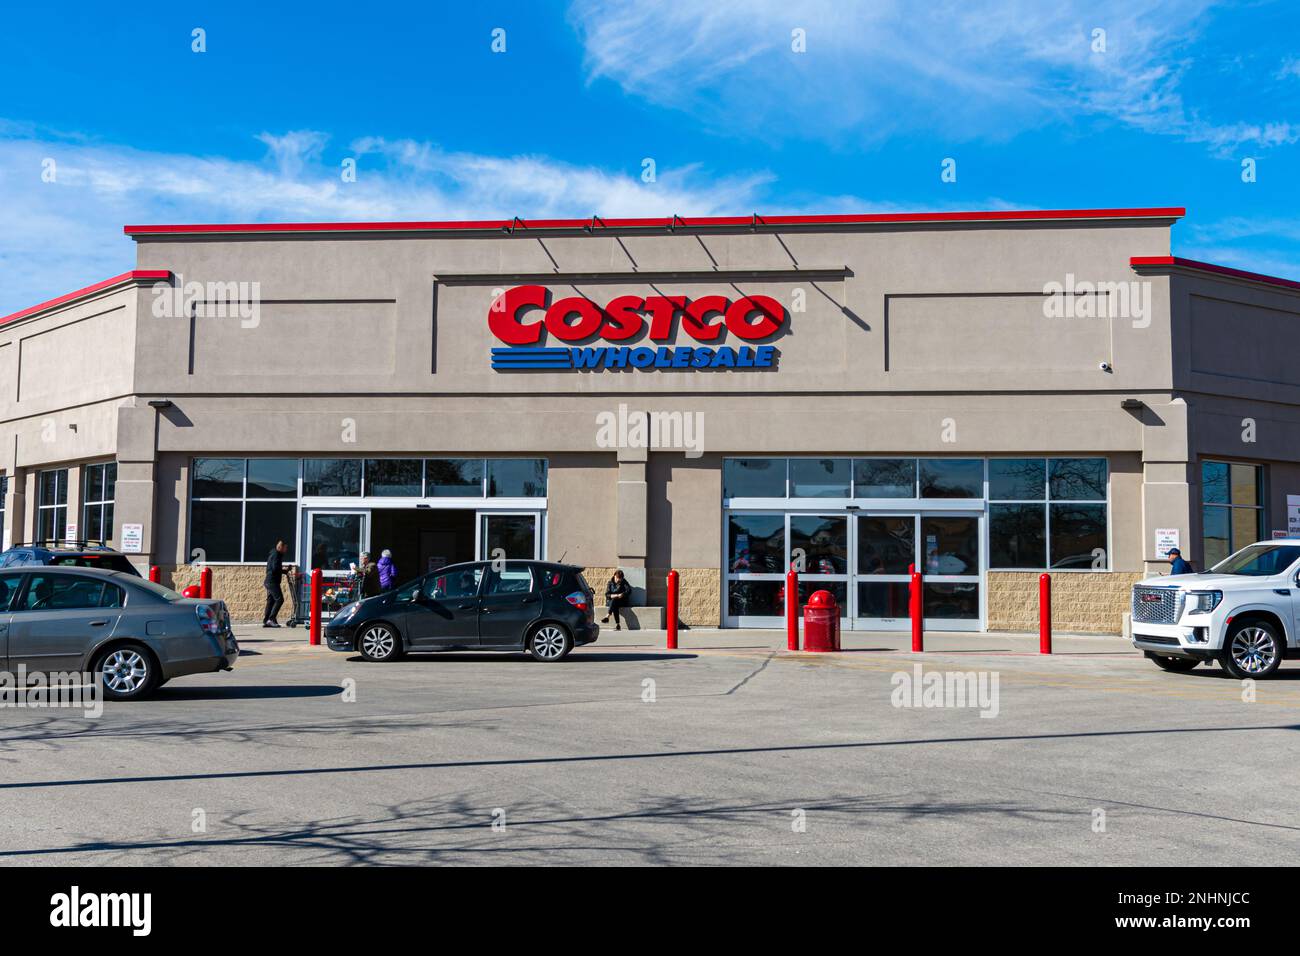 Niles, Illinois, United States - February 21, 2023: Front entrance of a Costco Wholesale store located in a Chicago suburb. Stock Photo